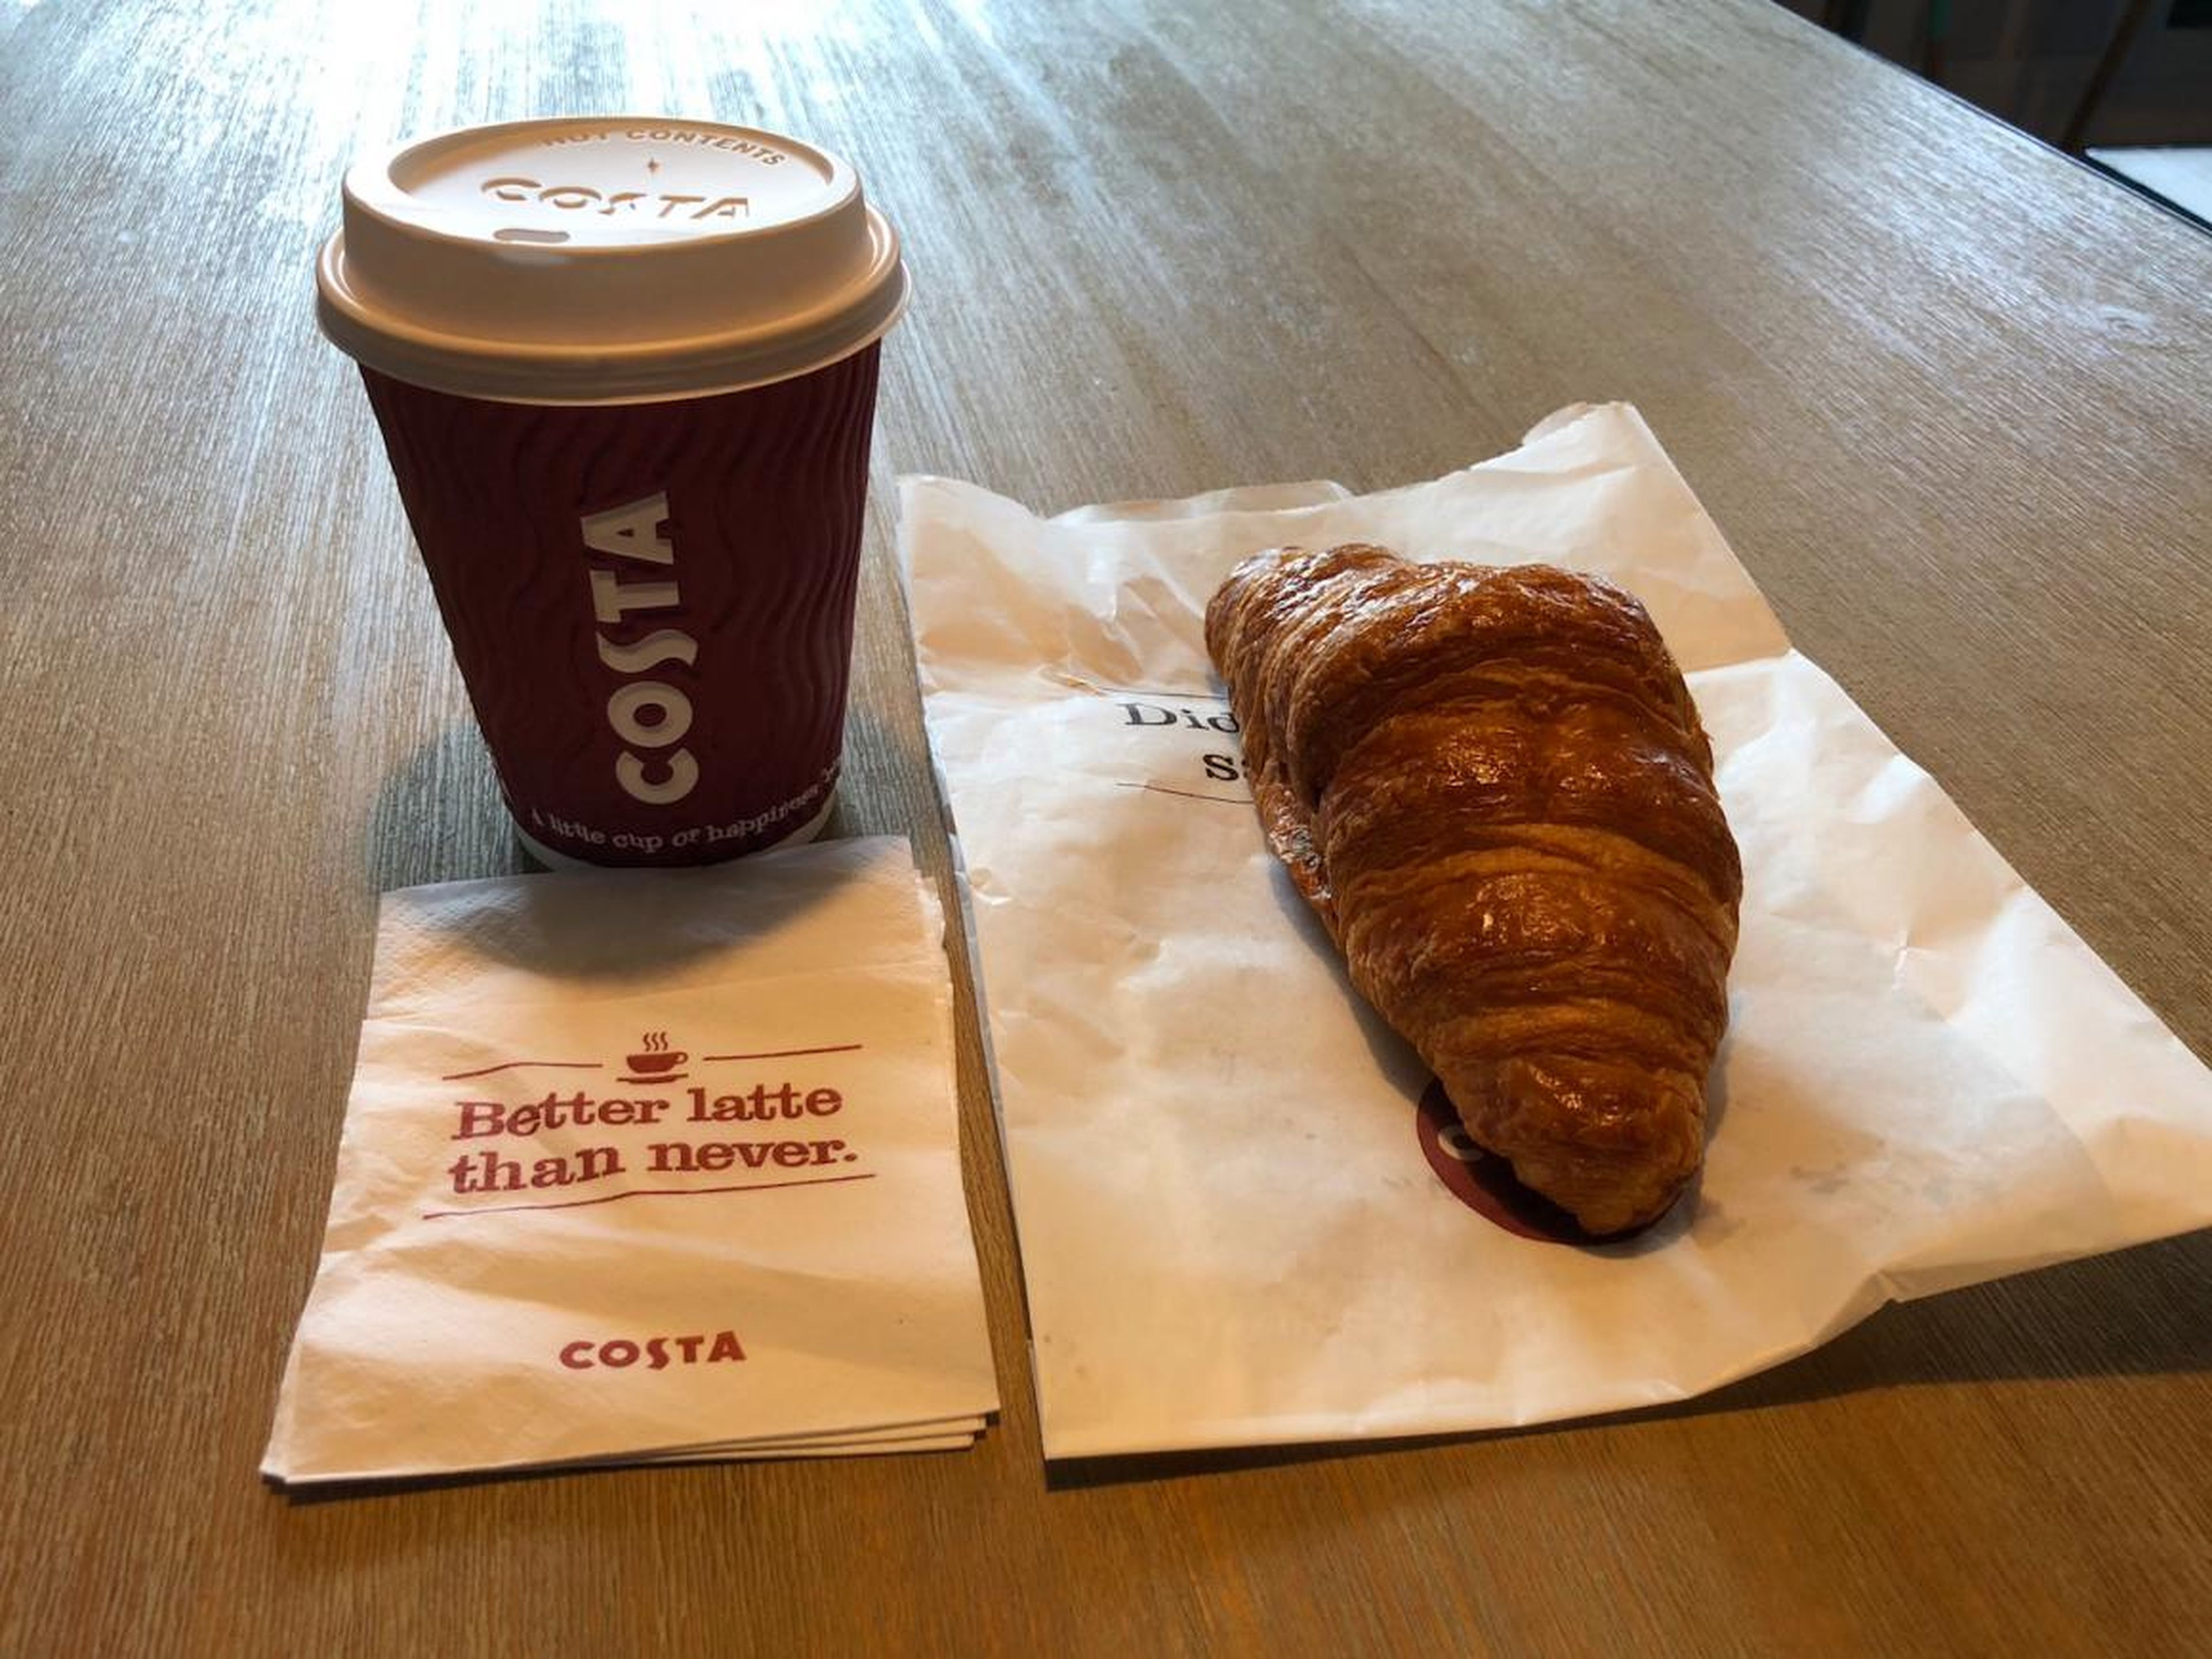 The croissant looked and tasted like papier-mâché, and it was inferior to most croissants you can buy for half the price in Britain's supermarkets. The coffee wasn't half bad though, despite the cringeworthy pun on the serviette.